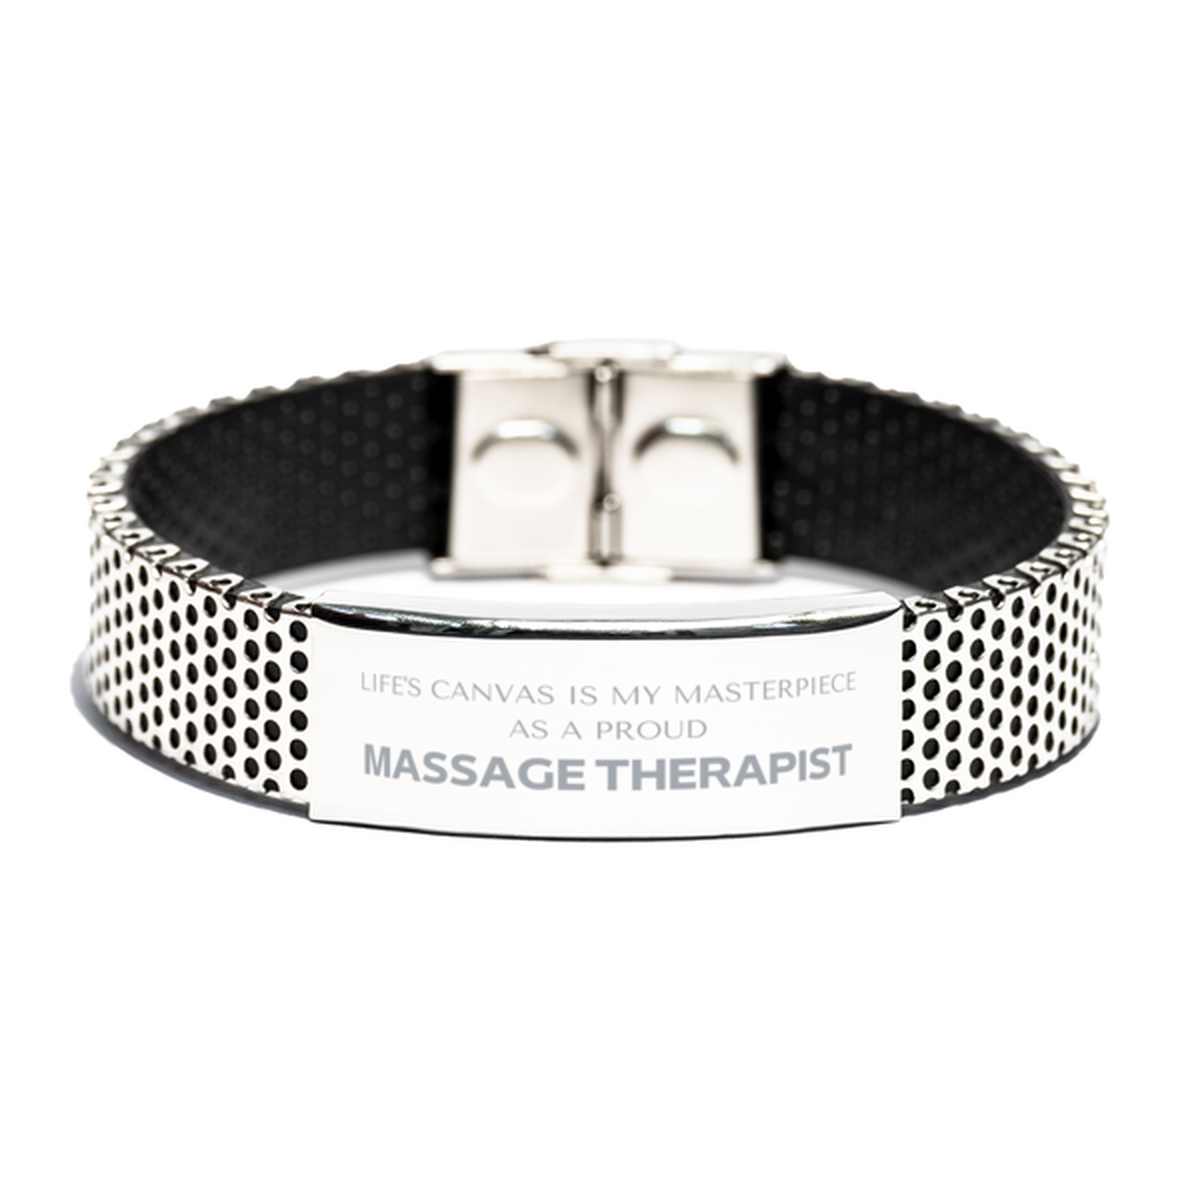 Proud Massage Therapist Gifts, Life's canvas is my masterpiece, Epic Birthday Christmas Unique Stainless Steel Bracelet For Massage Therapist, Coworkers, Men, Women, Friends